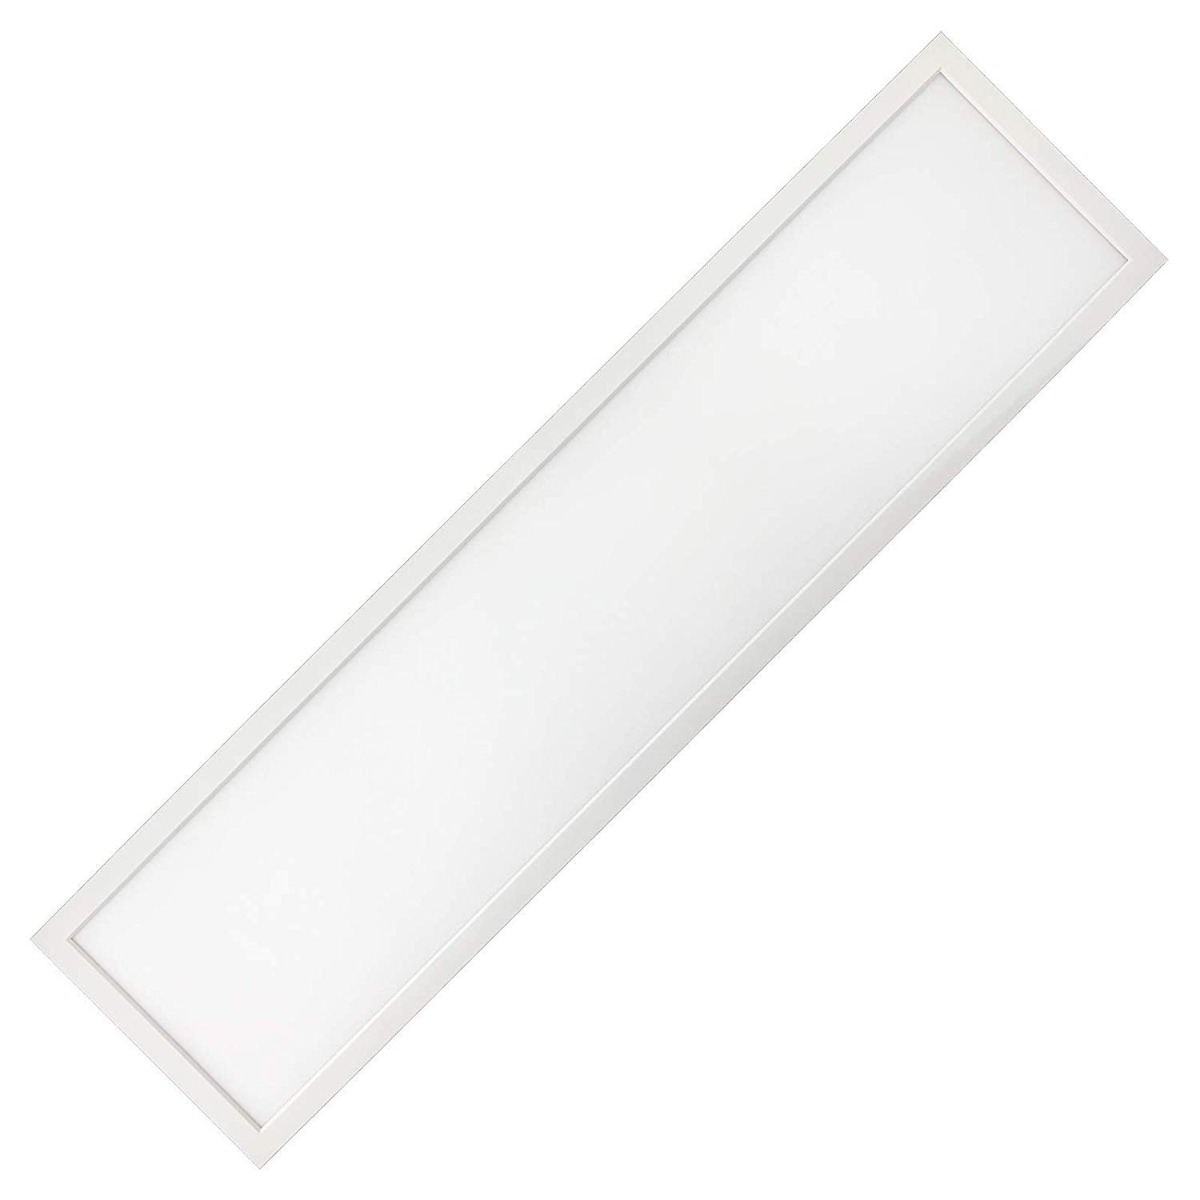 View 40w LED Panel 1200x300mm Cool Warm Natural White Light information